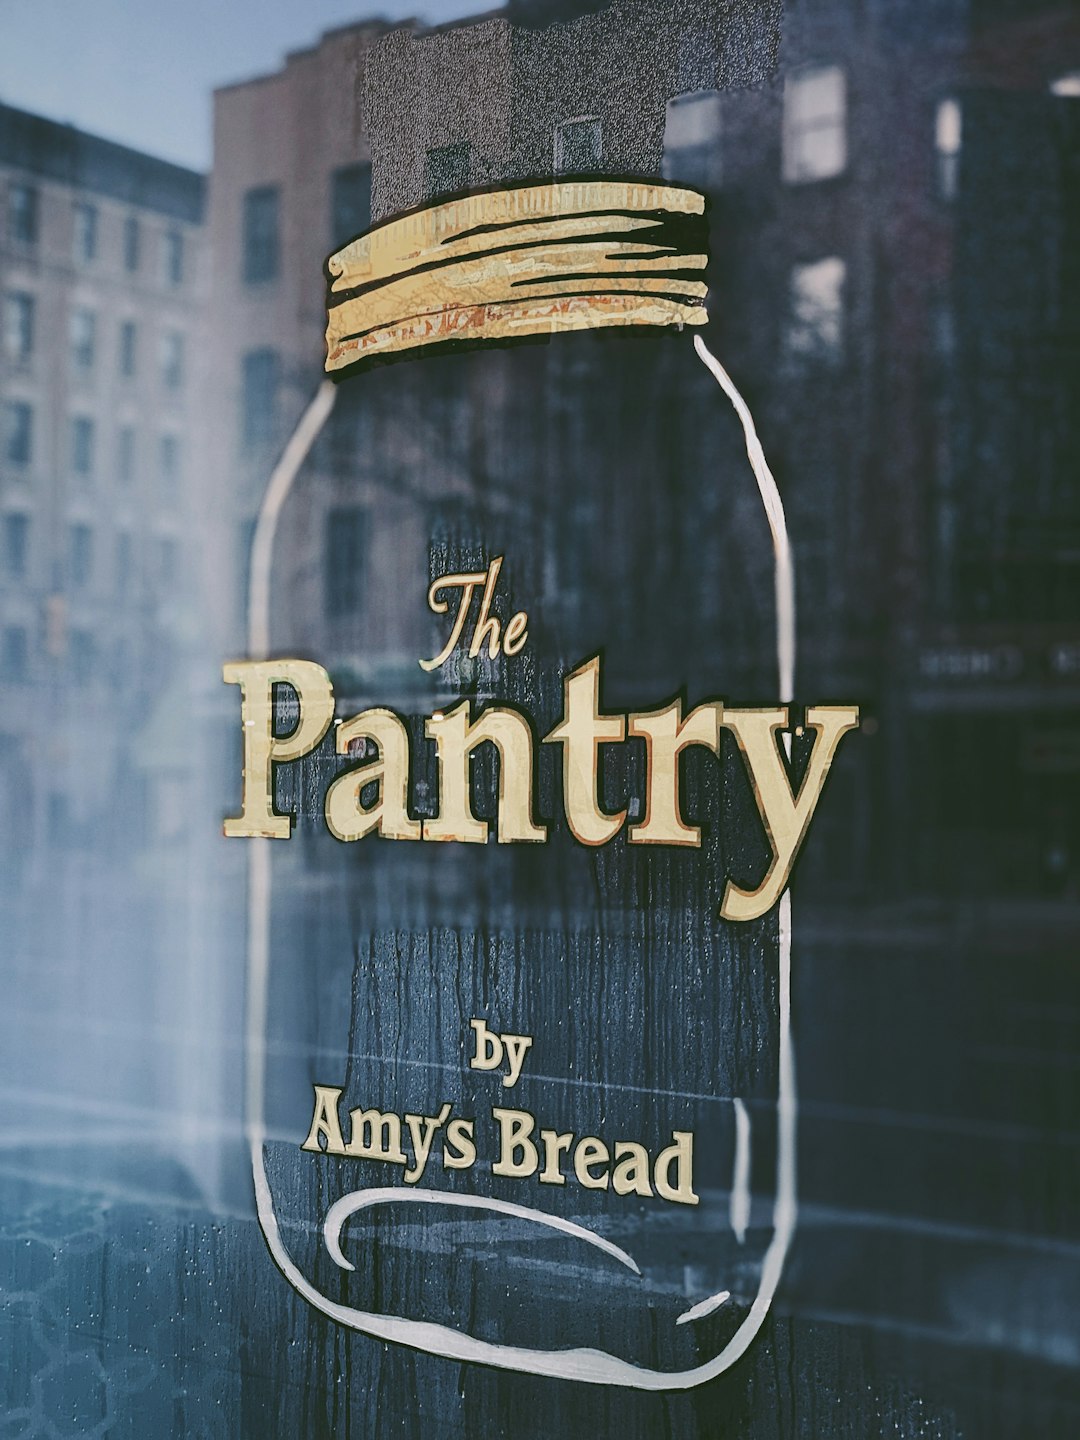 The Pantry by Amy's Bread signage